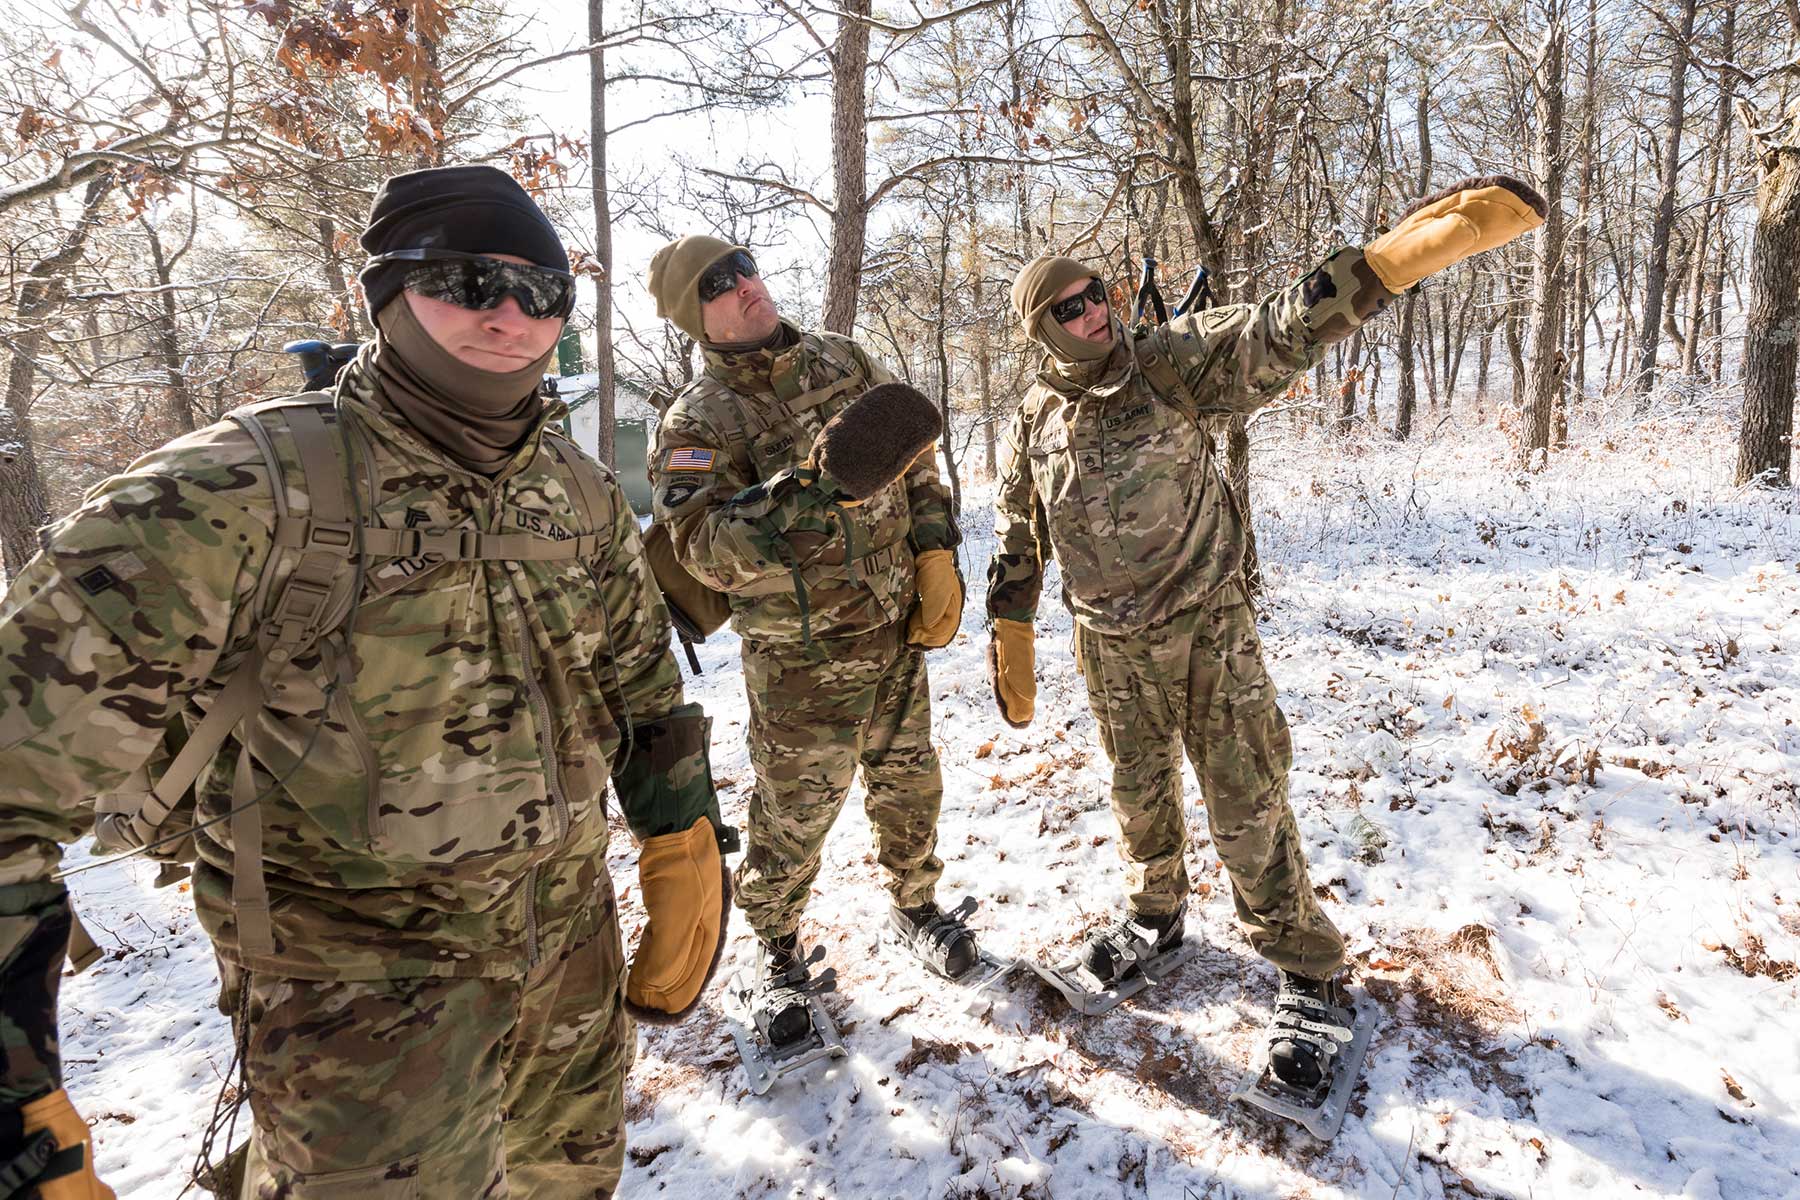 Soldiers and Marines prepare for a cold weather march using snowshoes while at Total Force Training Center Fort McCoy's Cold Weather Operations Course.